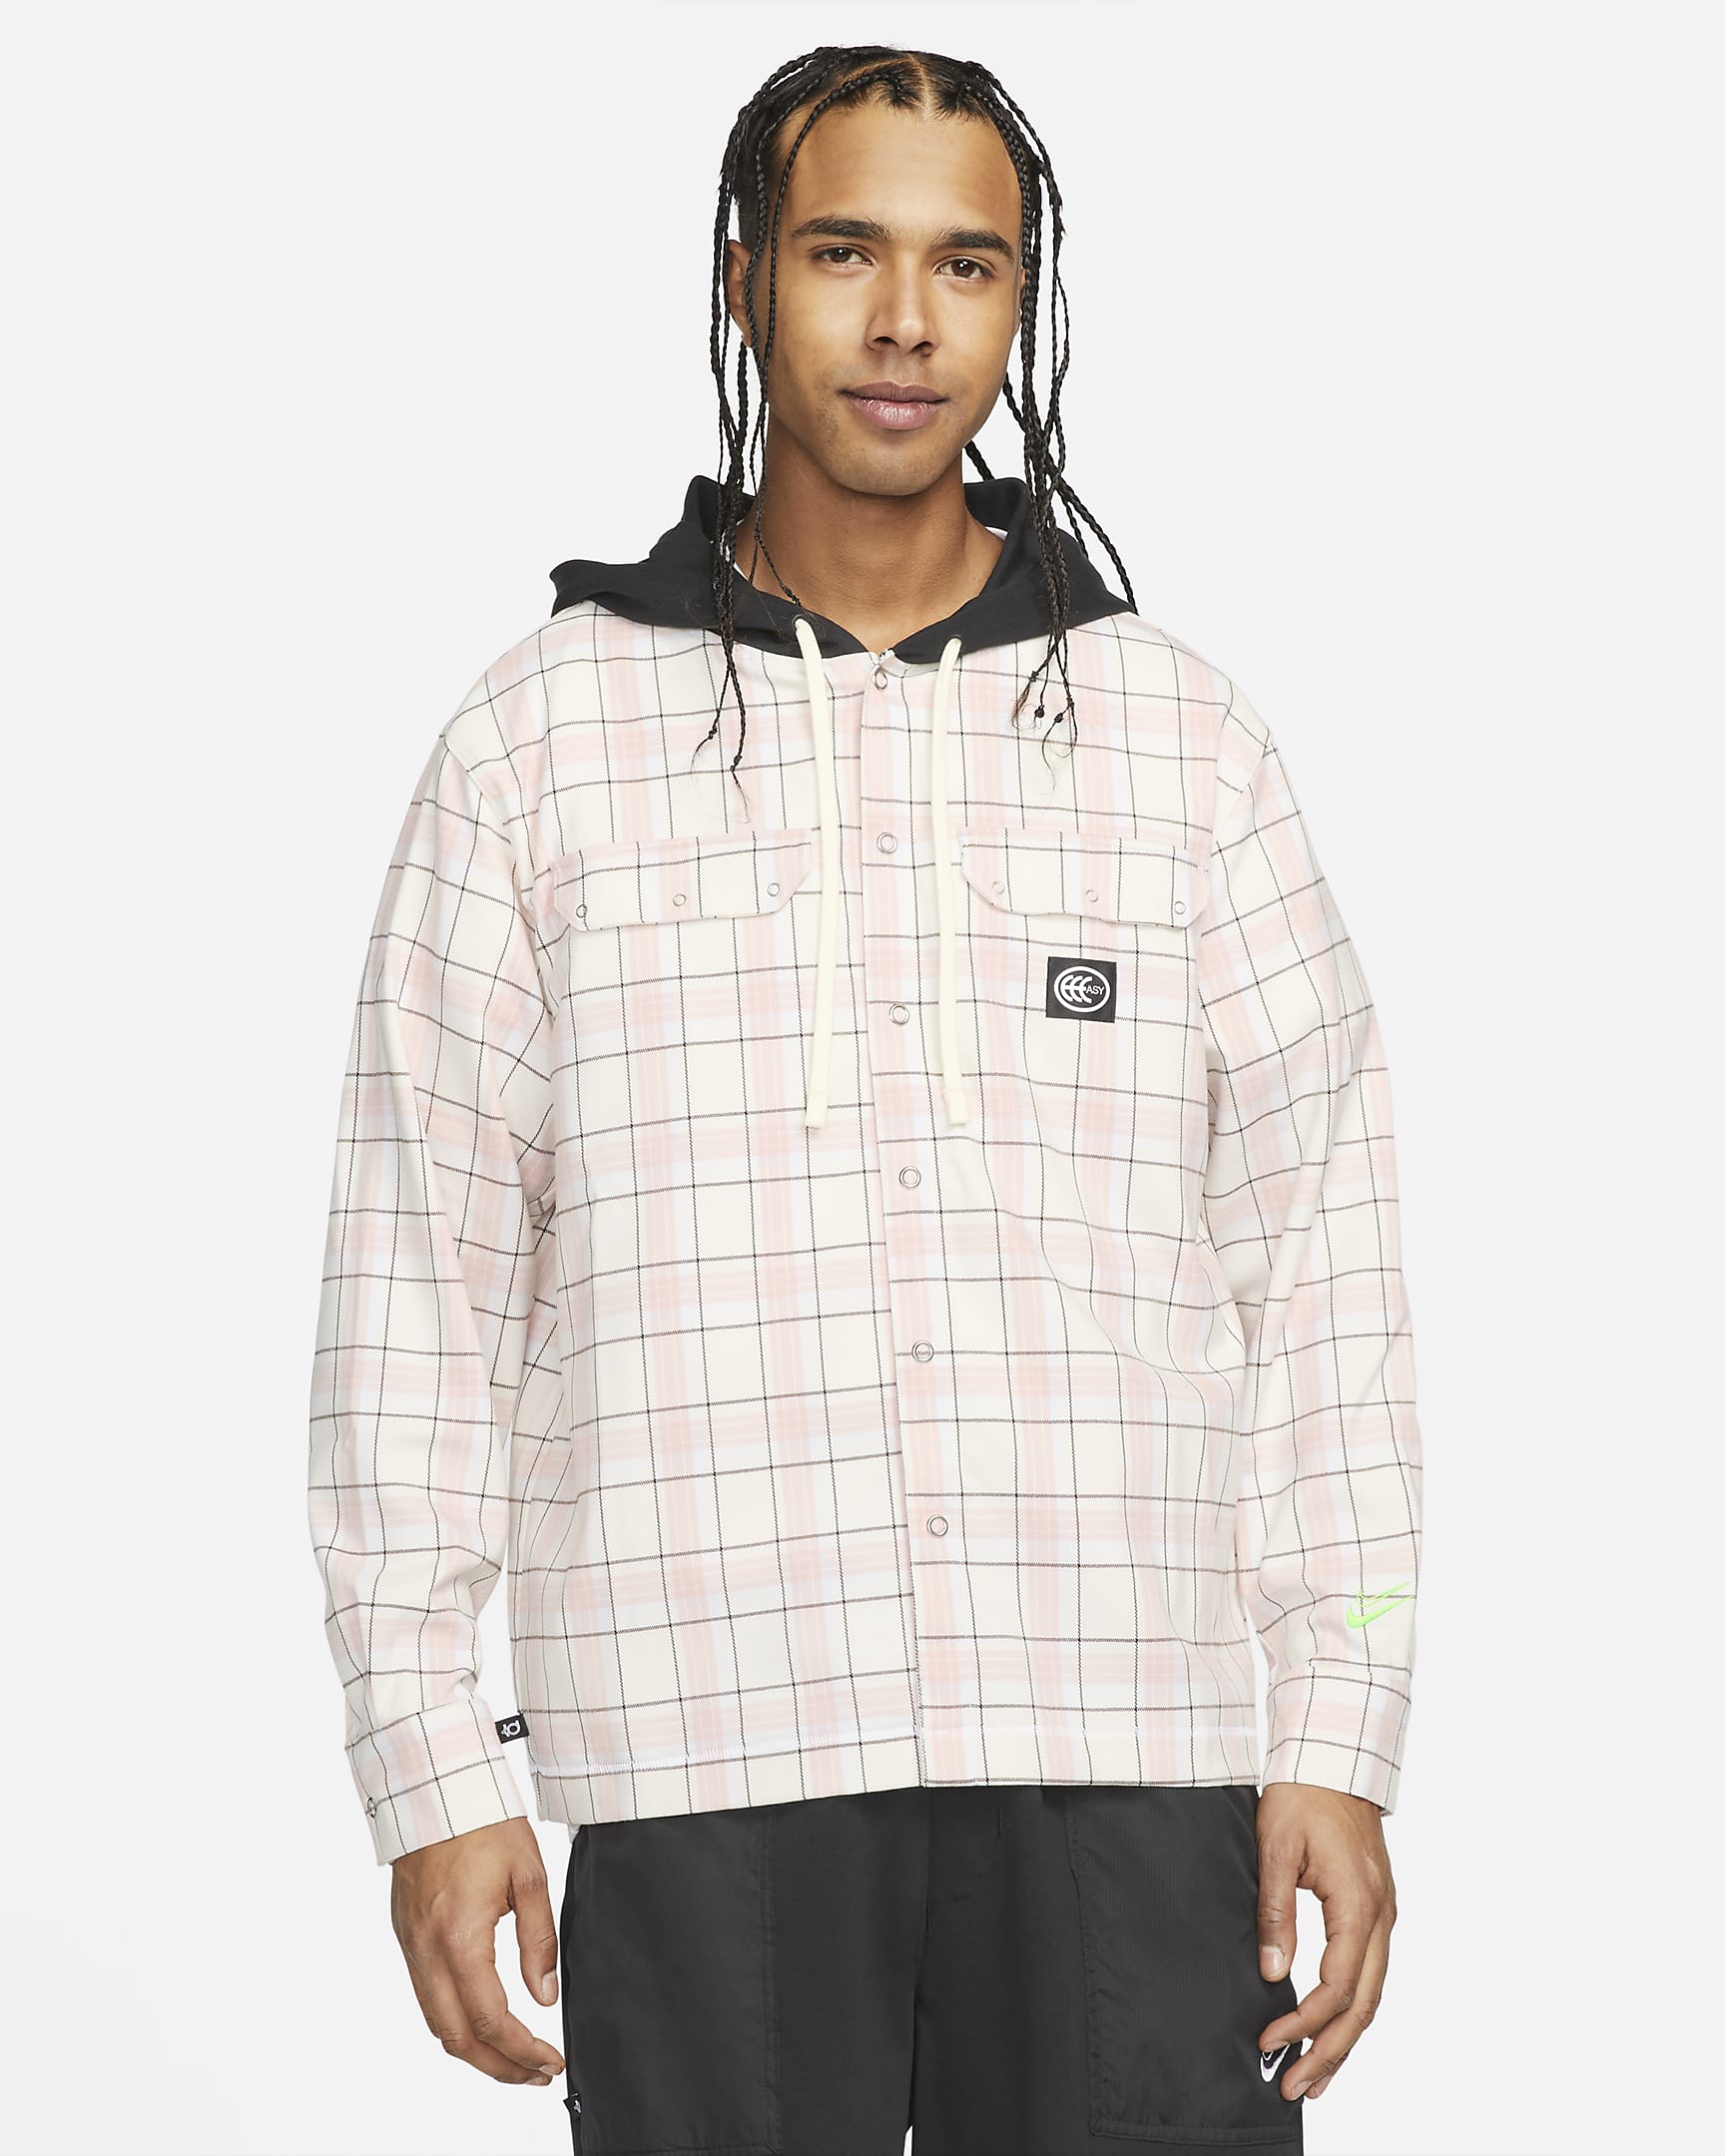 Kevin Durant Men's Hooded Basketball Flannel. Nike NO